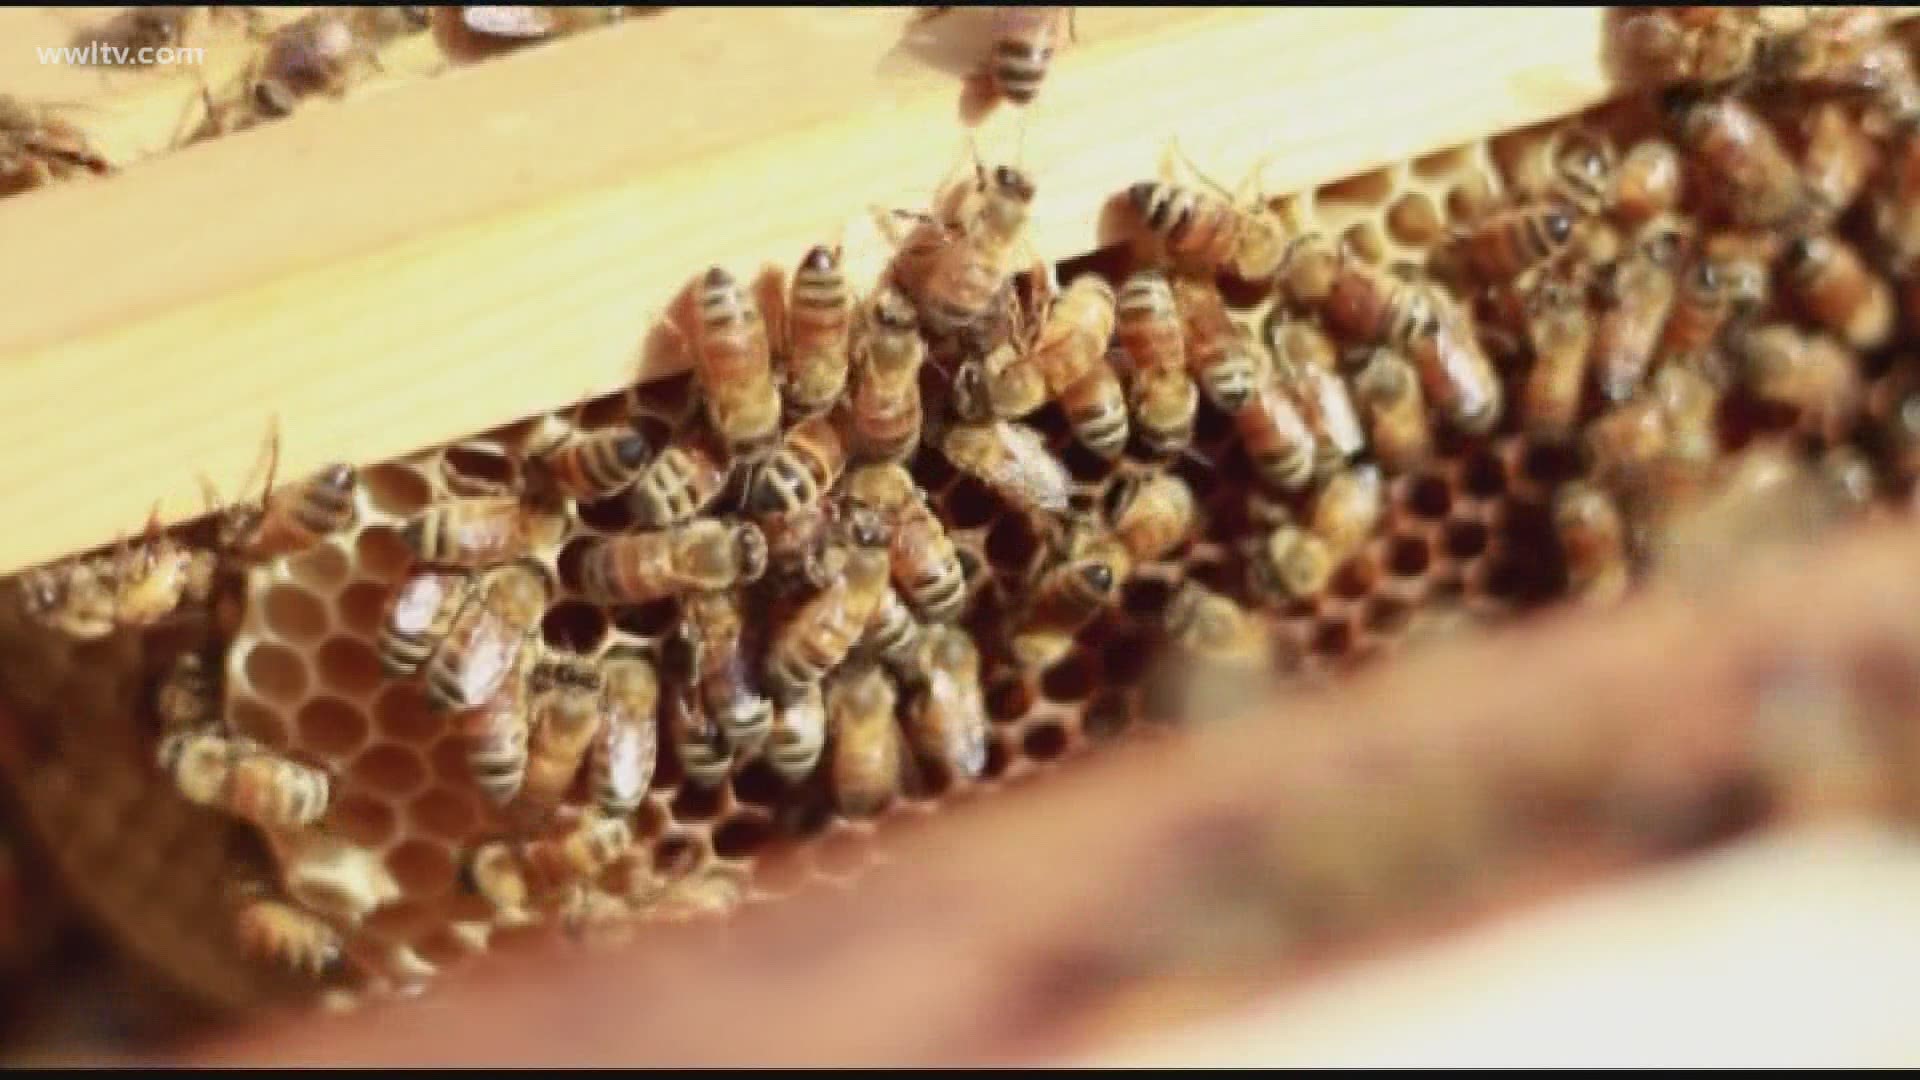 Study shows that honeybee venom can kill breast cancer cells, animal studies are now being done.